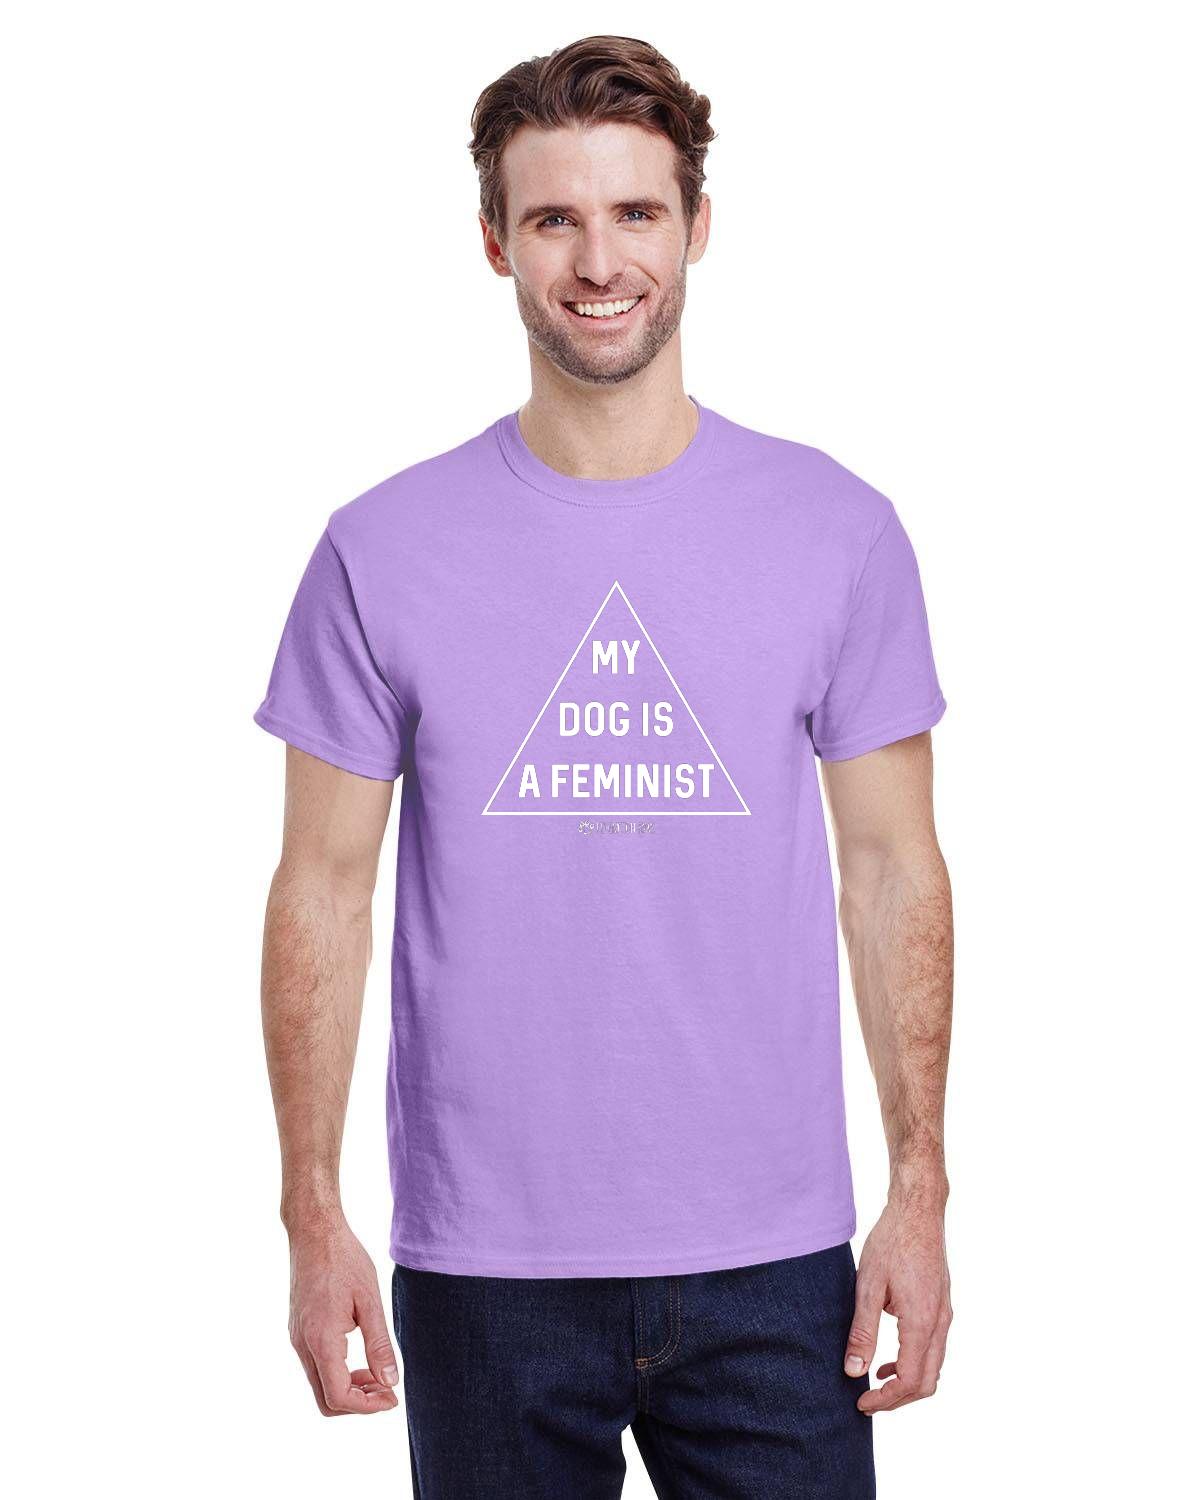 My Dog is a Feminist T-Shirt